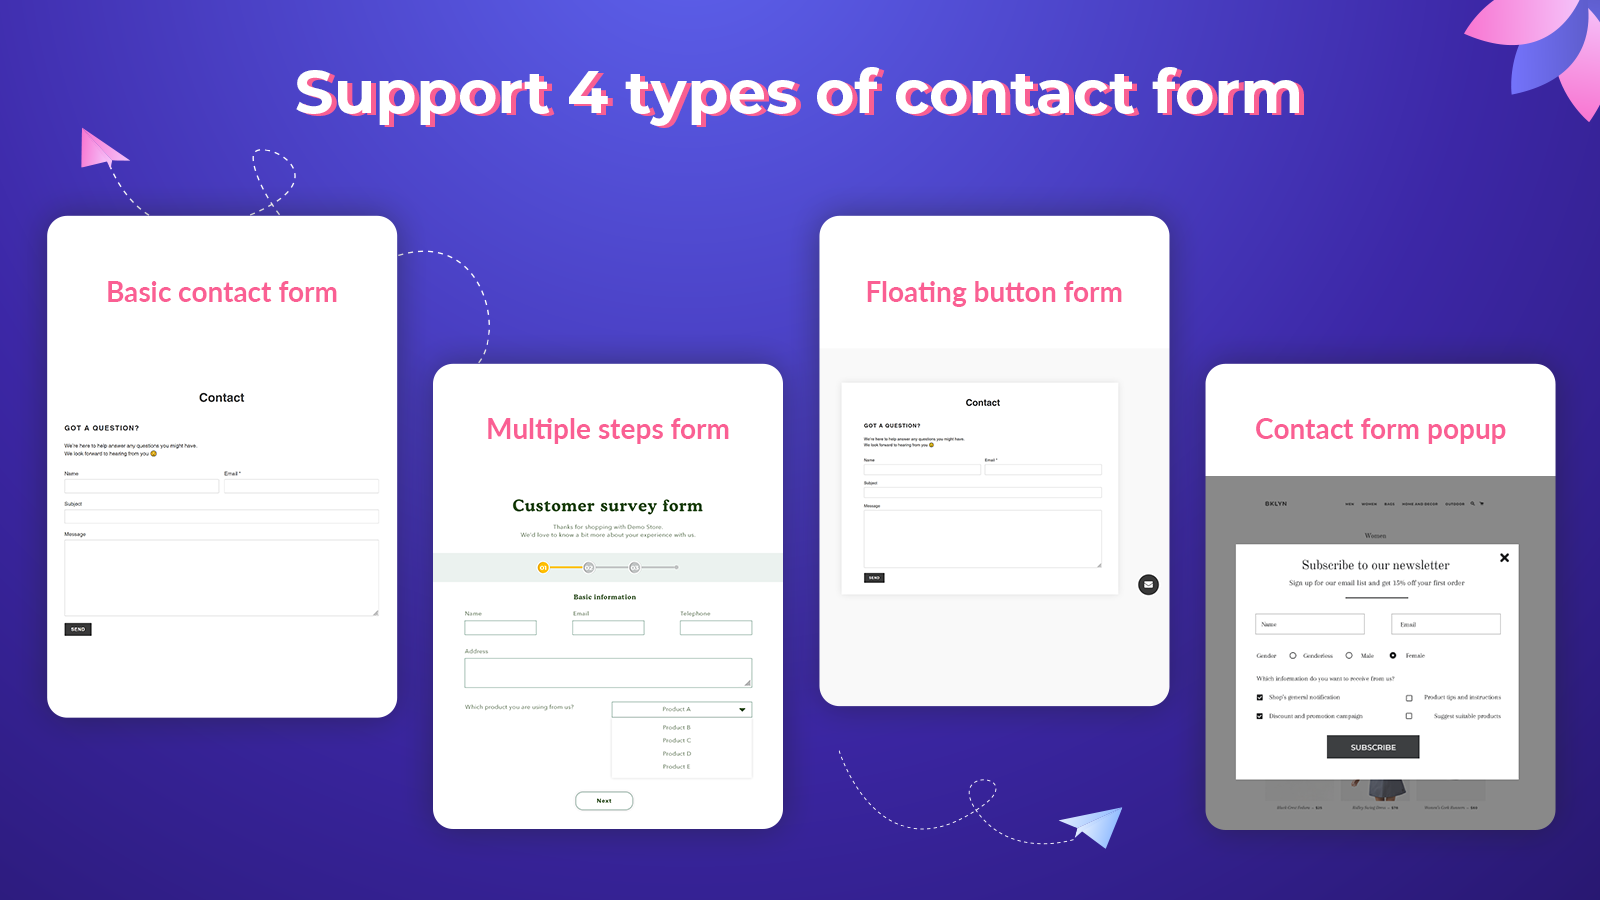 Support 4 types of contact form